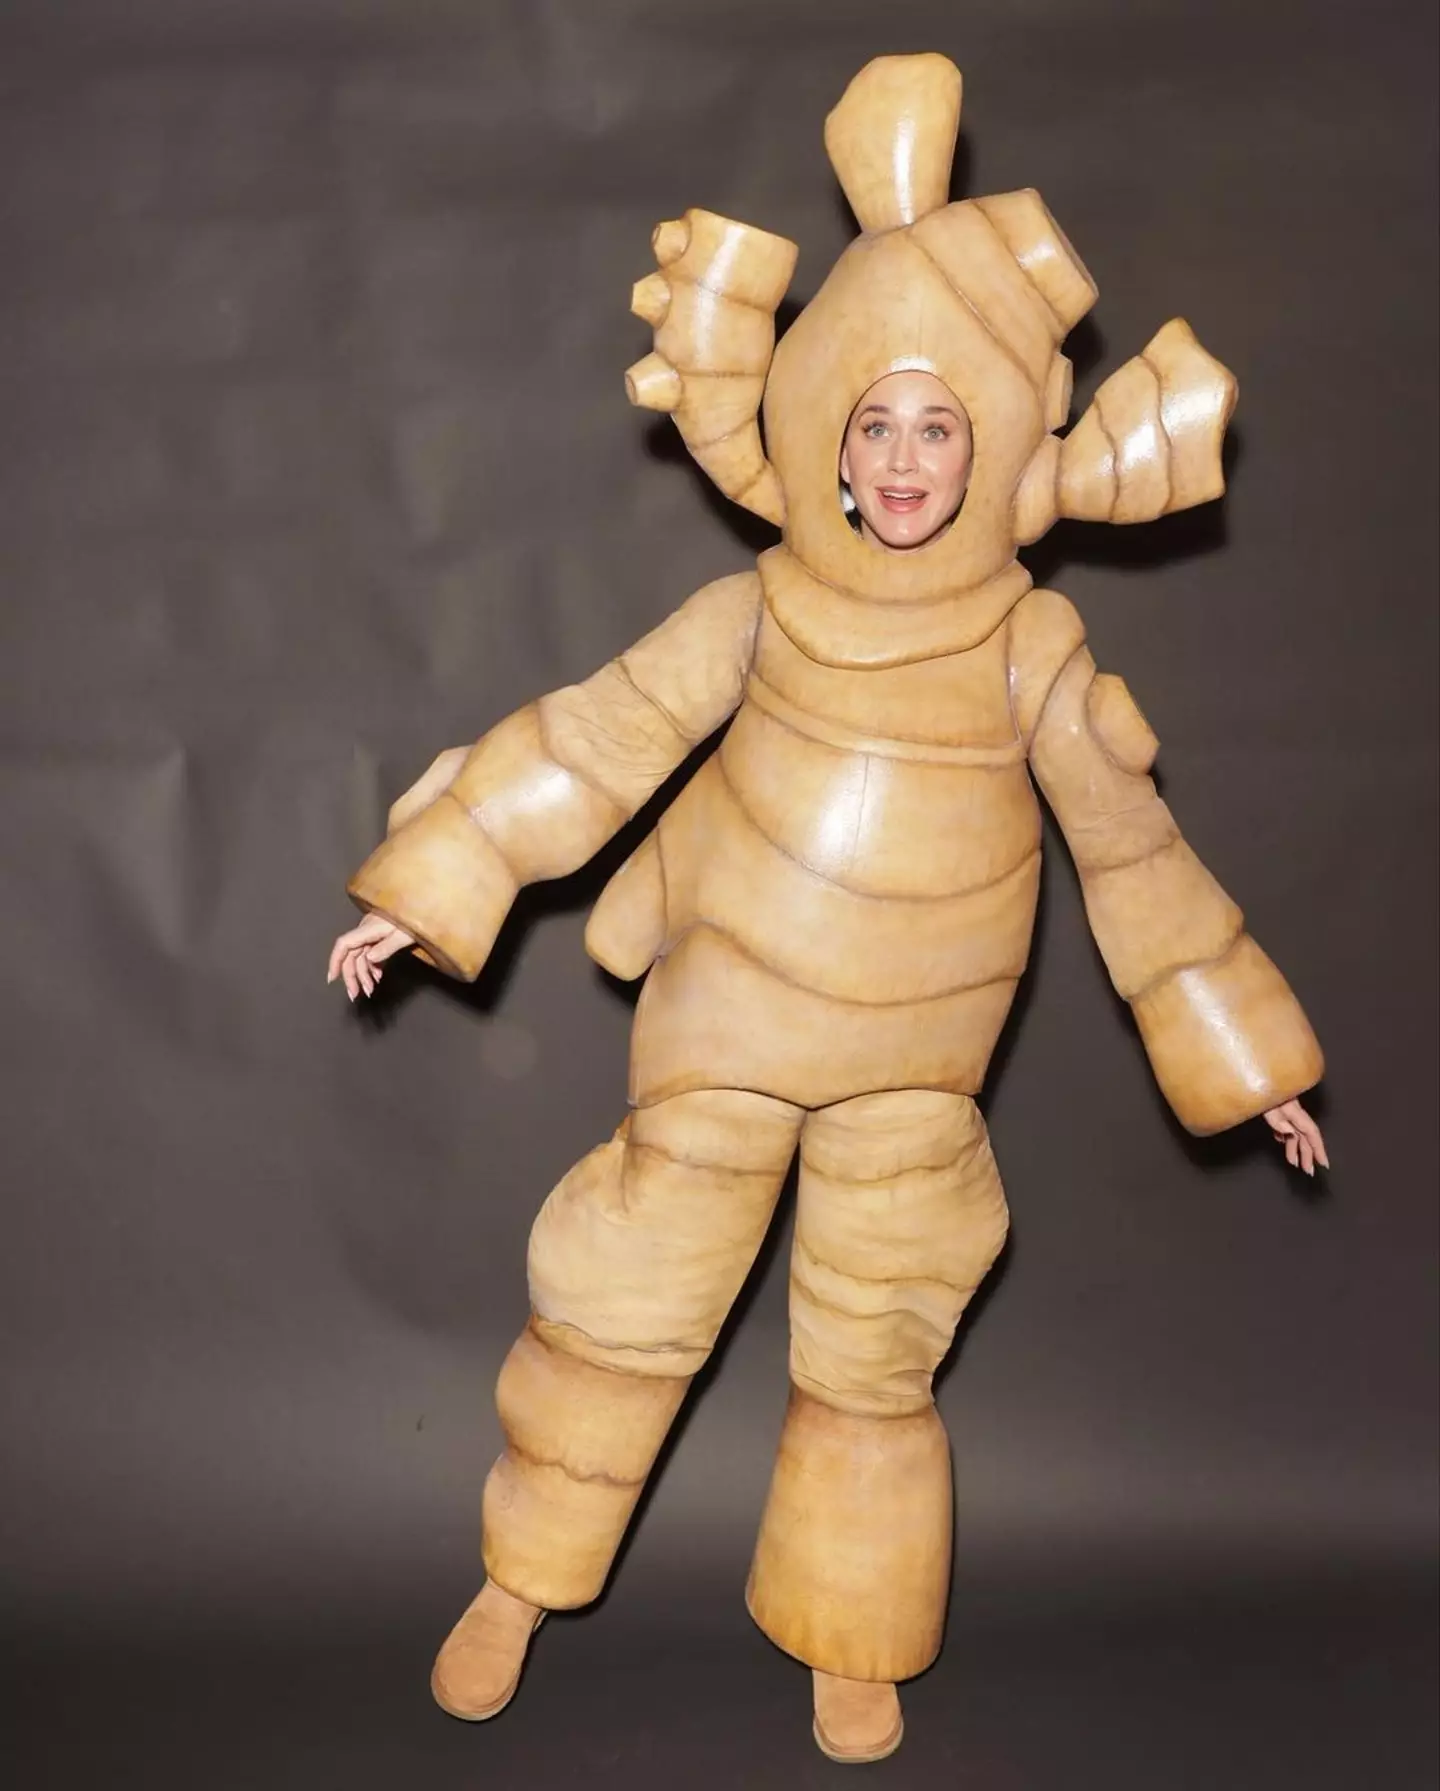 Katy Perry's new costume is causing a stir on social media.